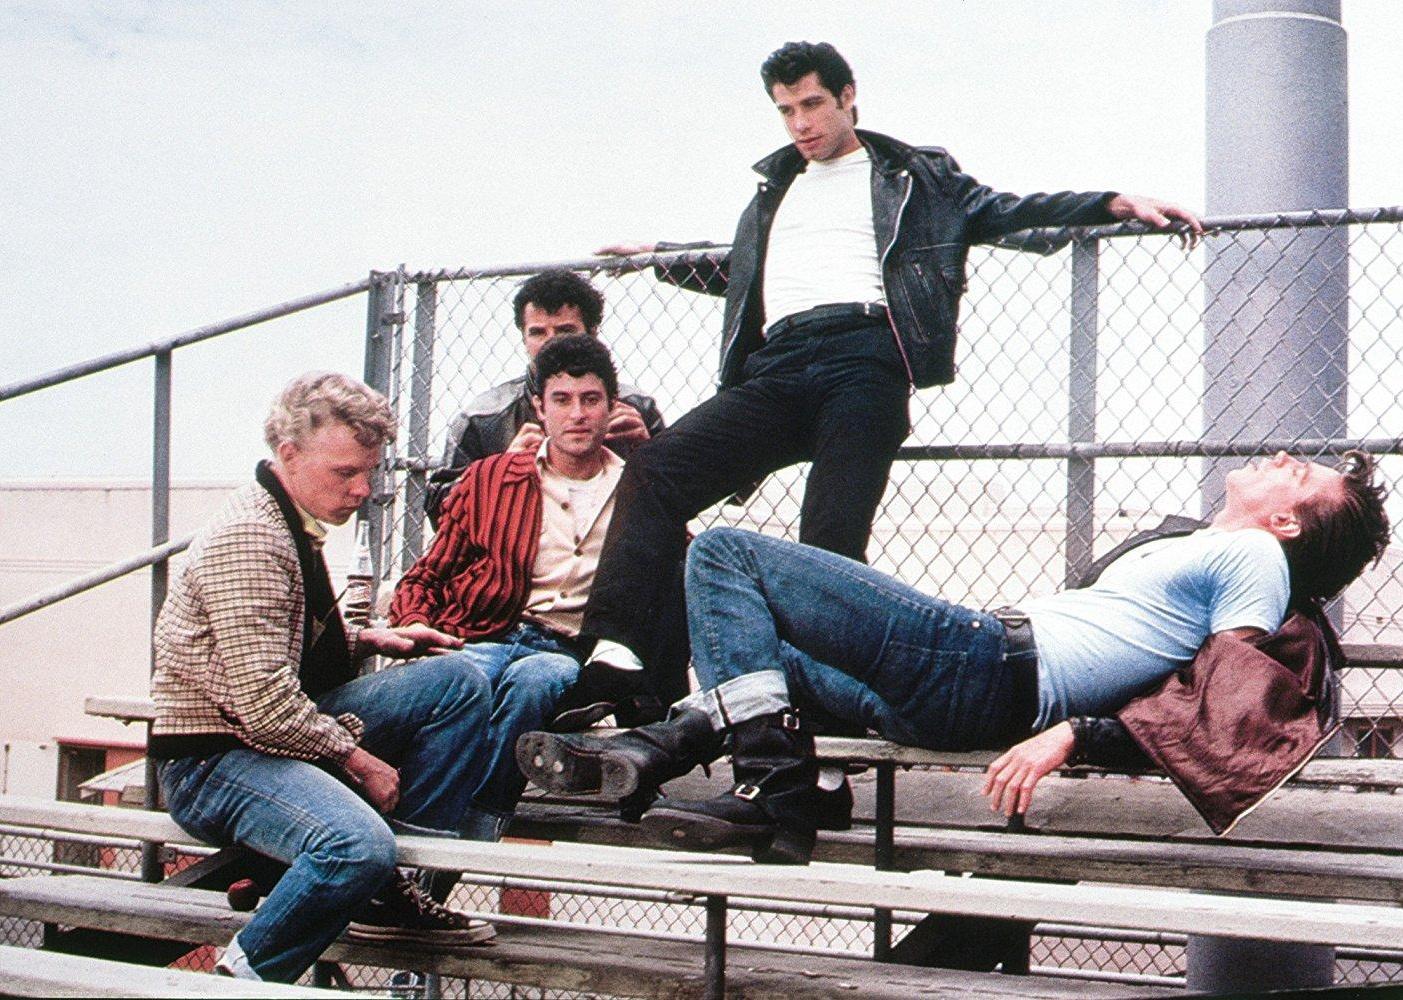 John Travolta and his buddies hang out on the bleachers.